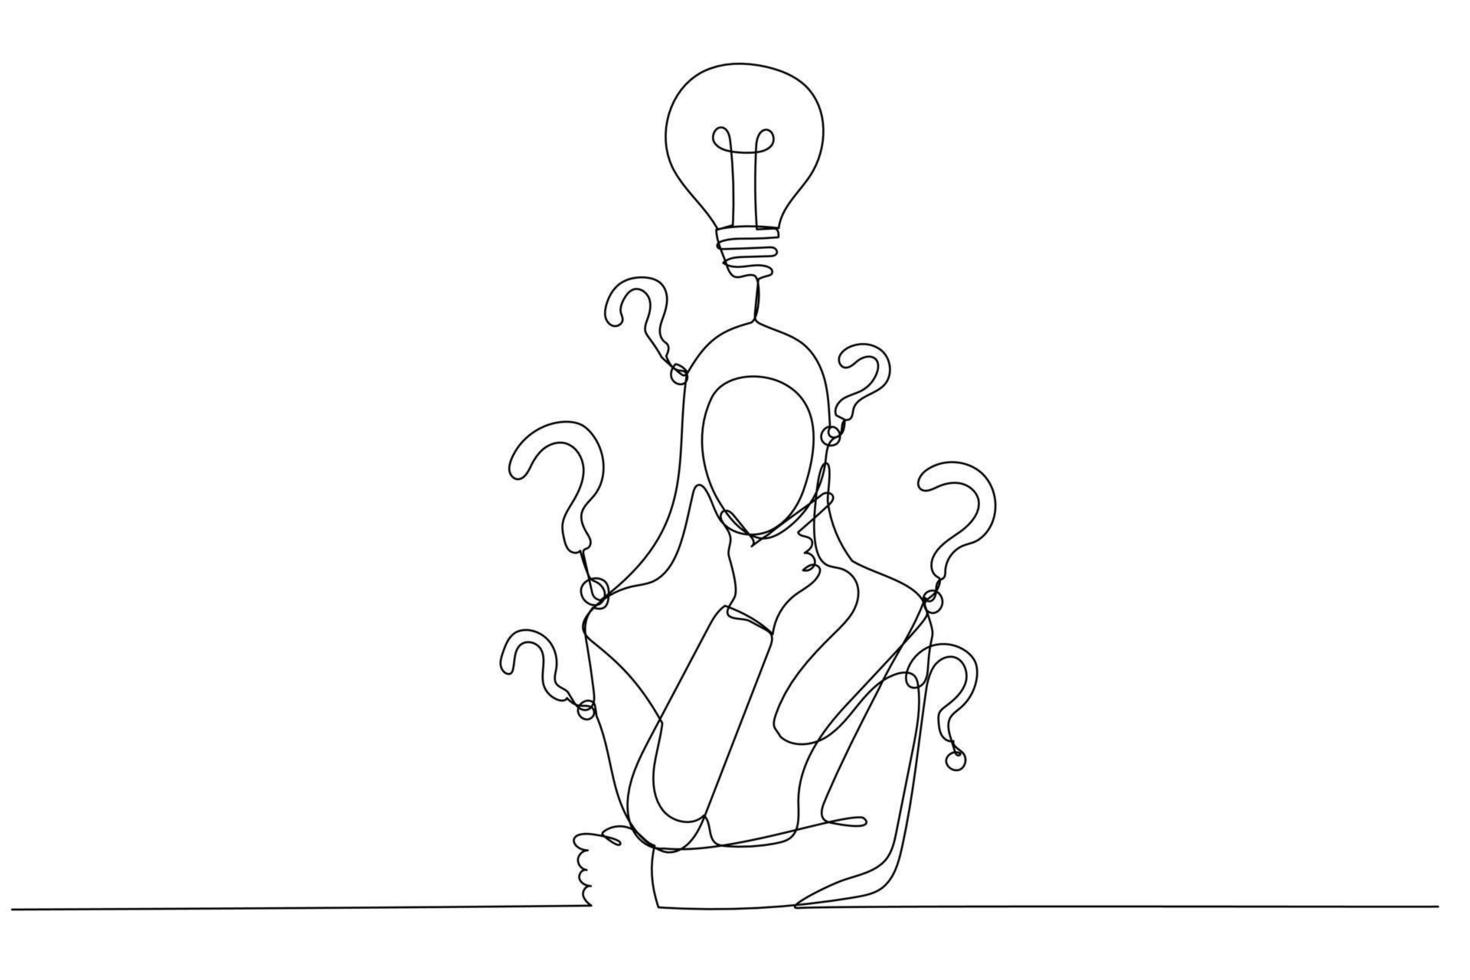 Illustration of muslim businesswoman with question mark and lamp. Single line art style vector